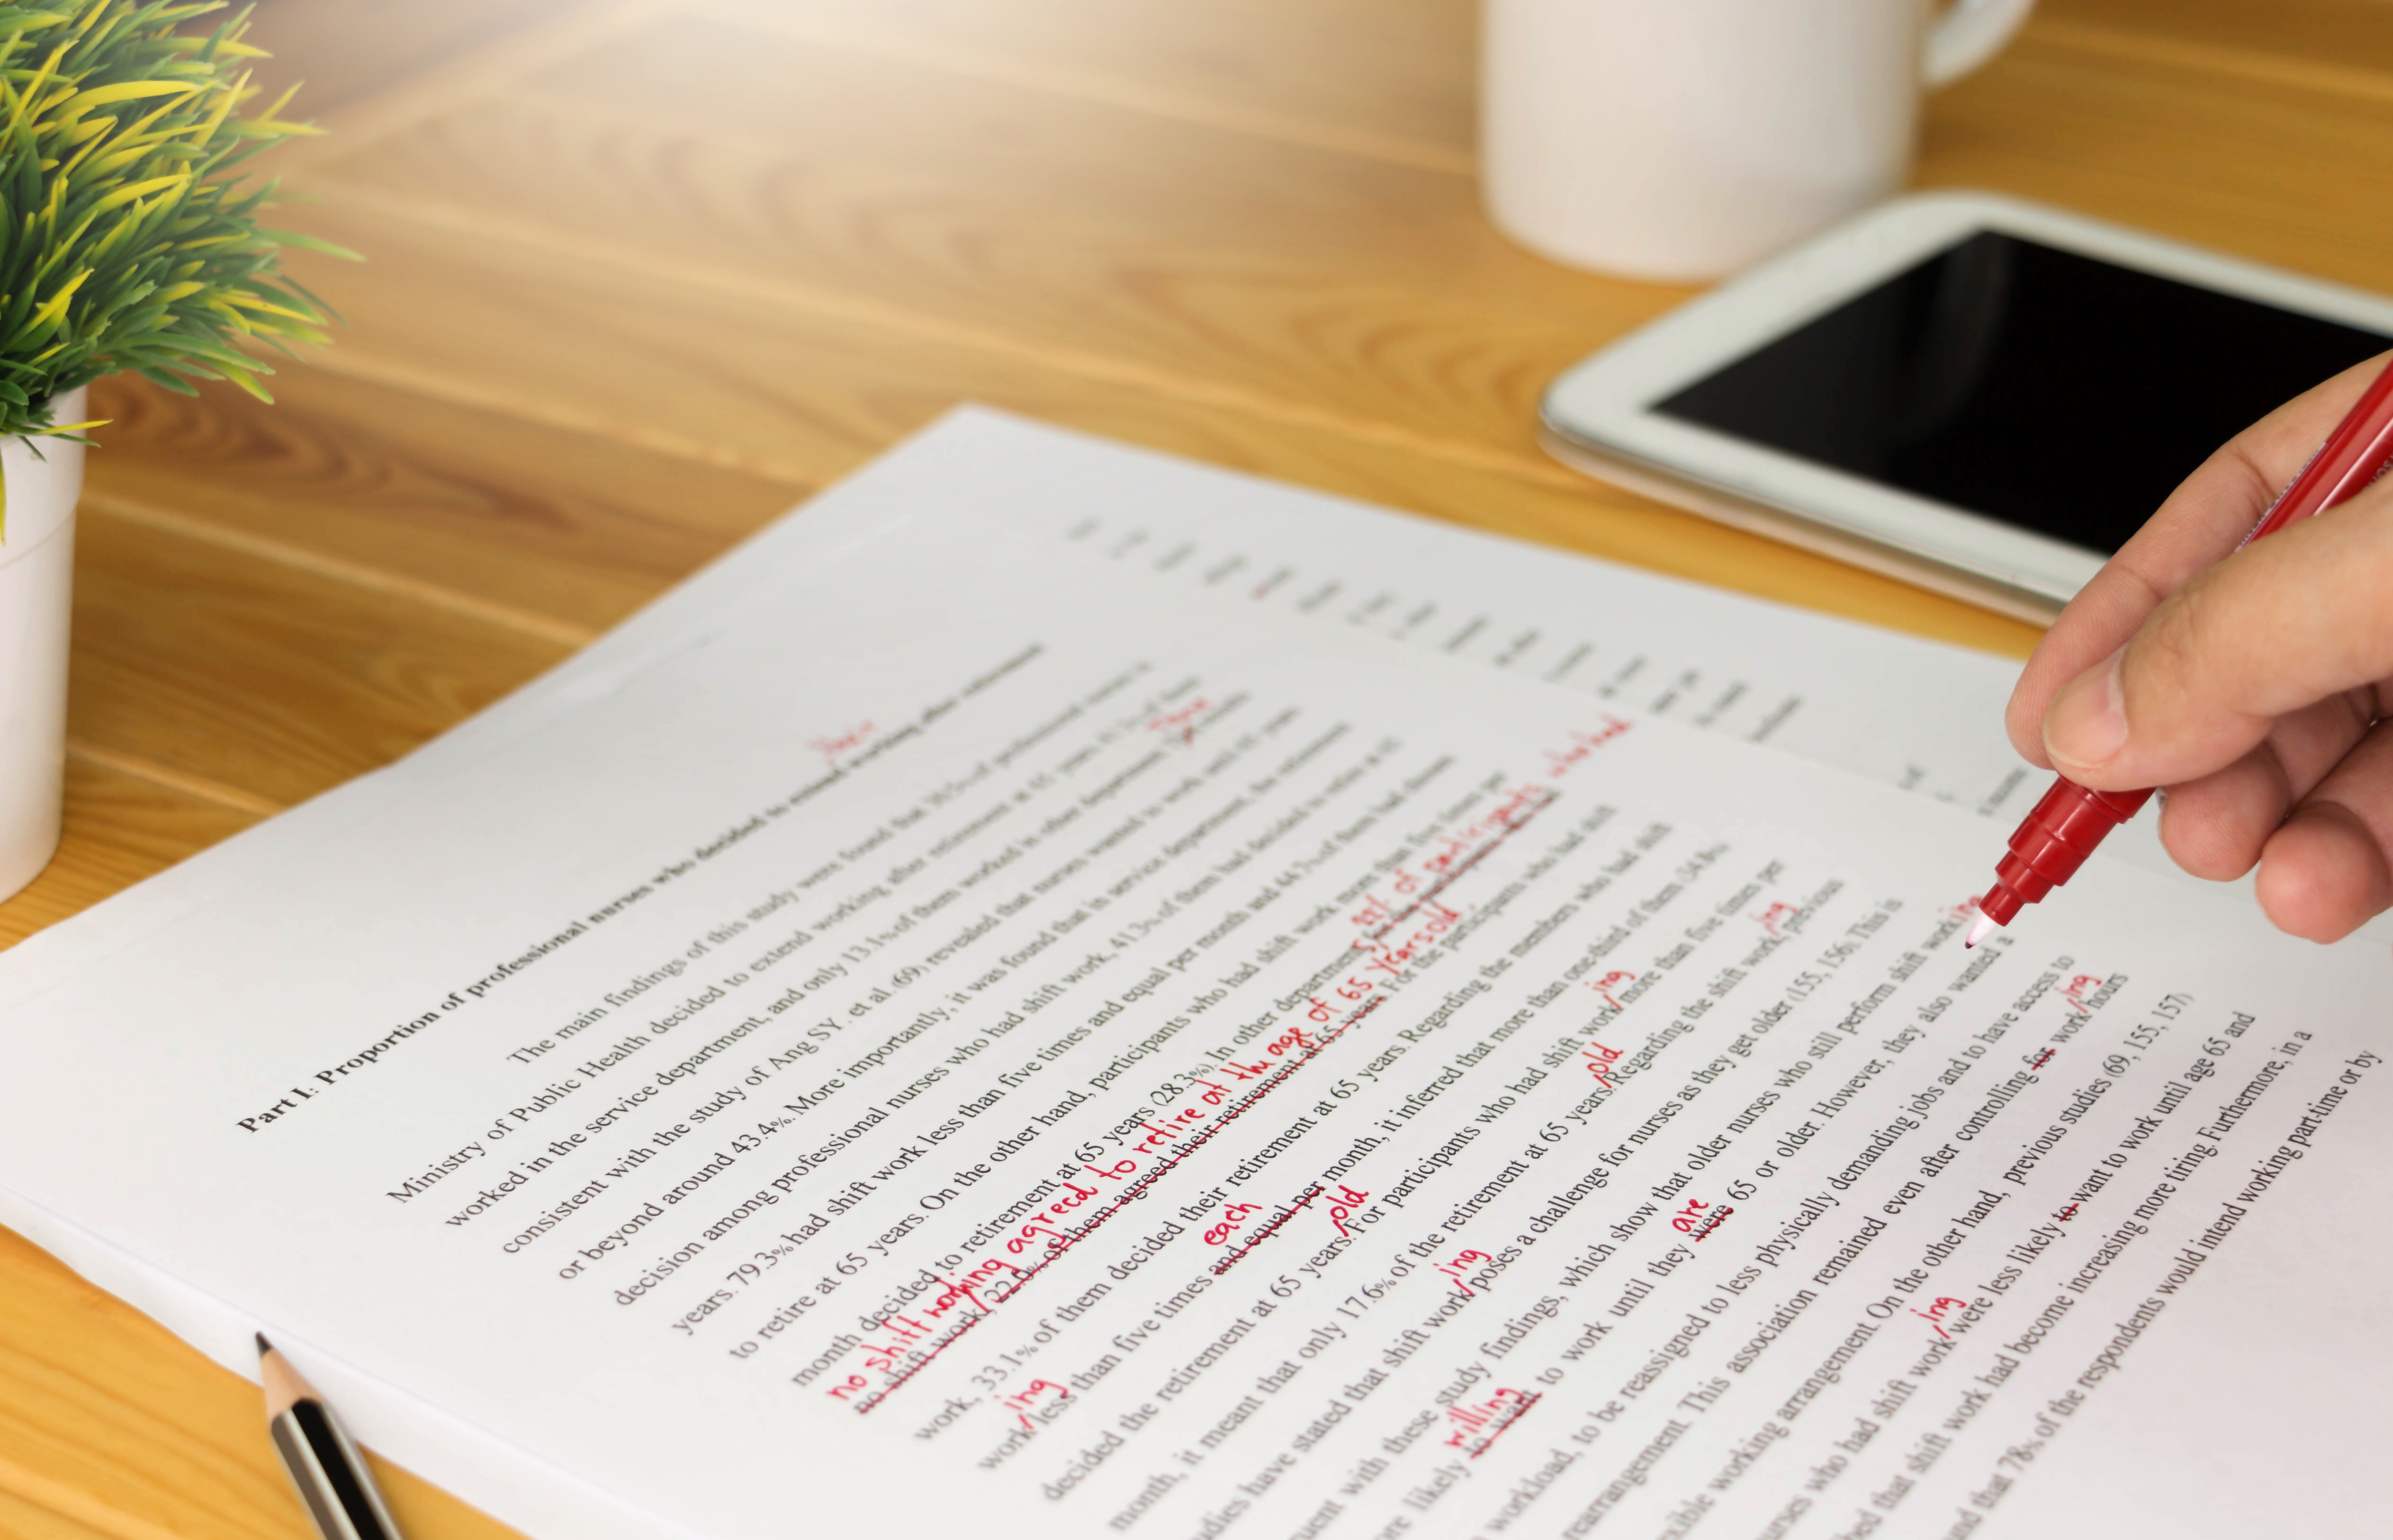 red pen markups on a typed paper